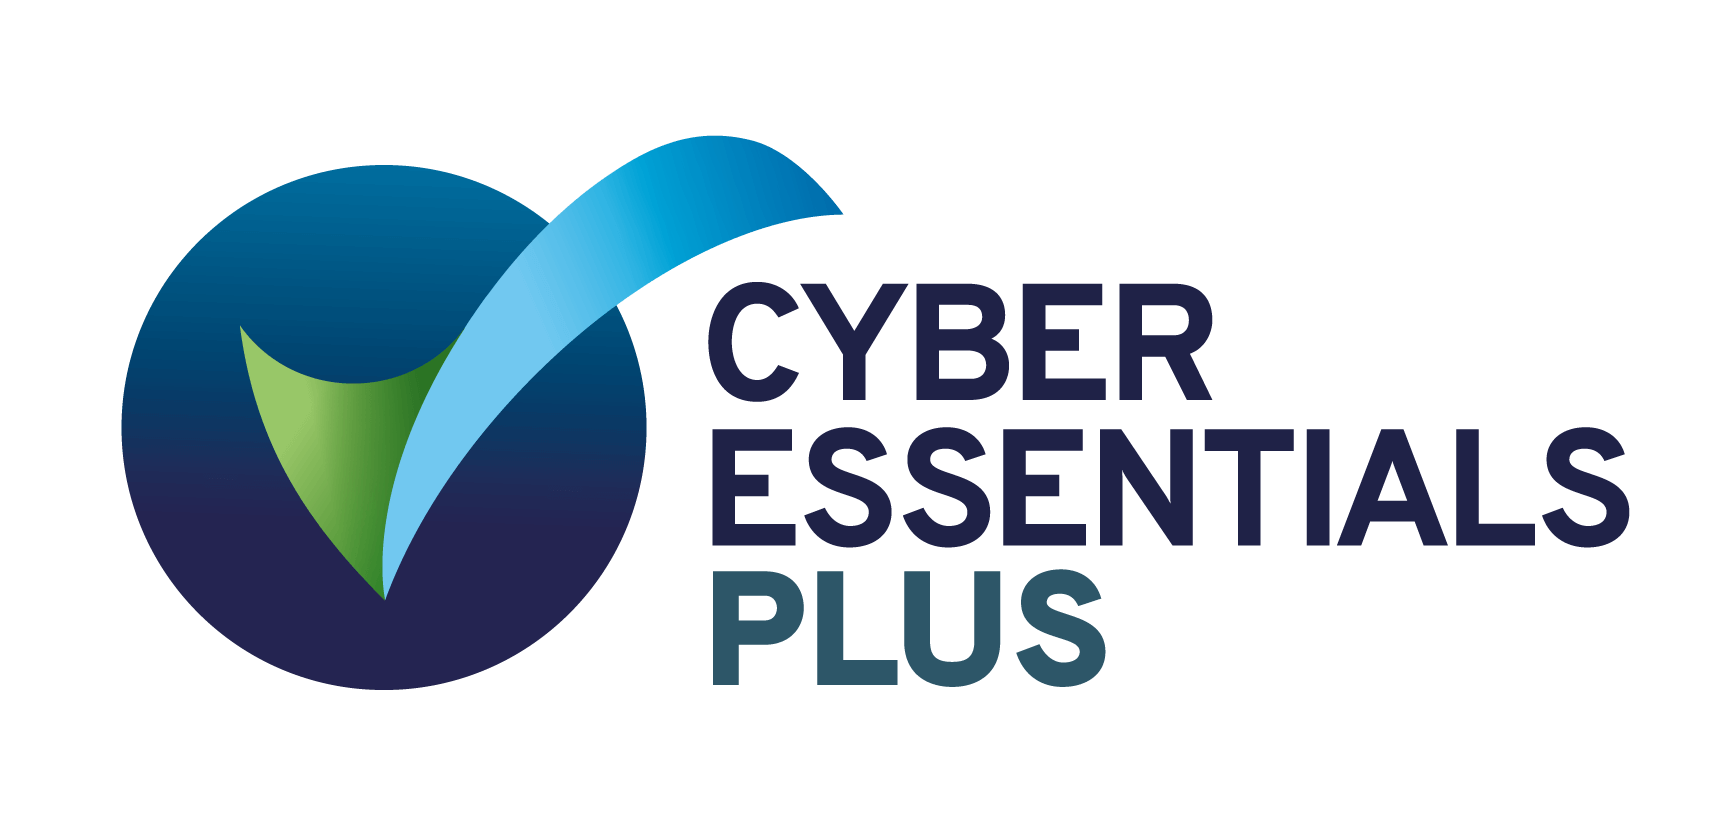 What is Cyber Essentials Plus?